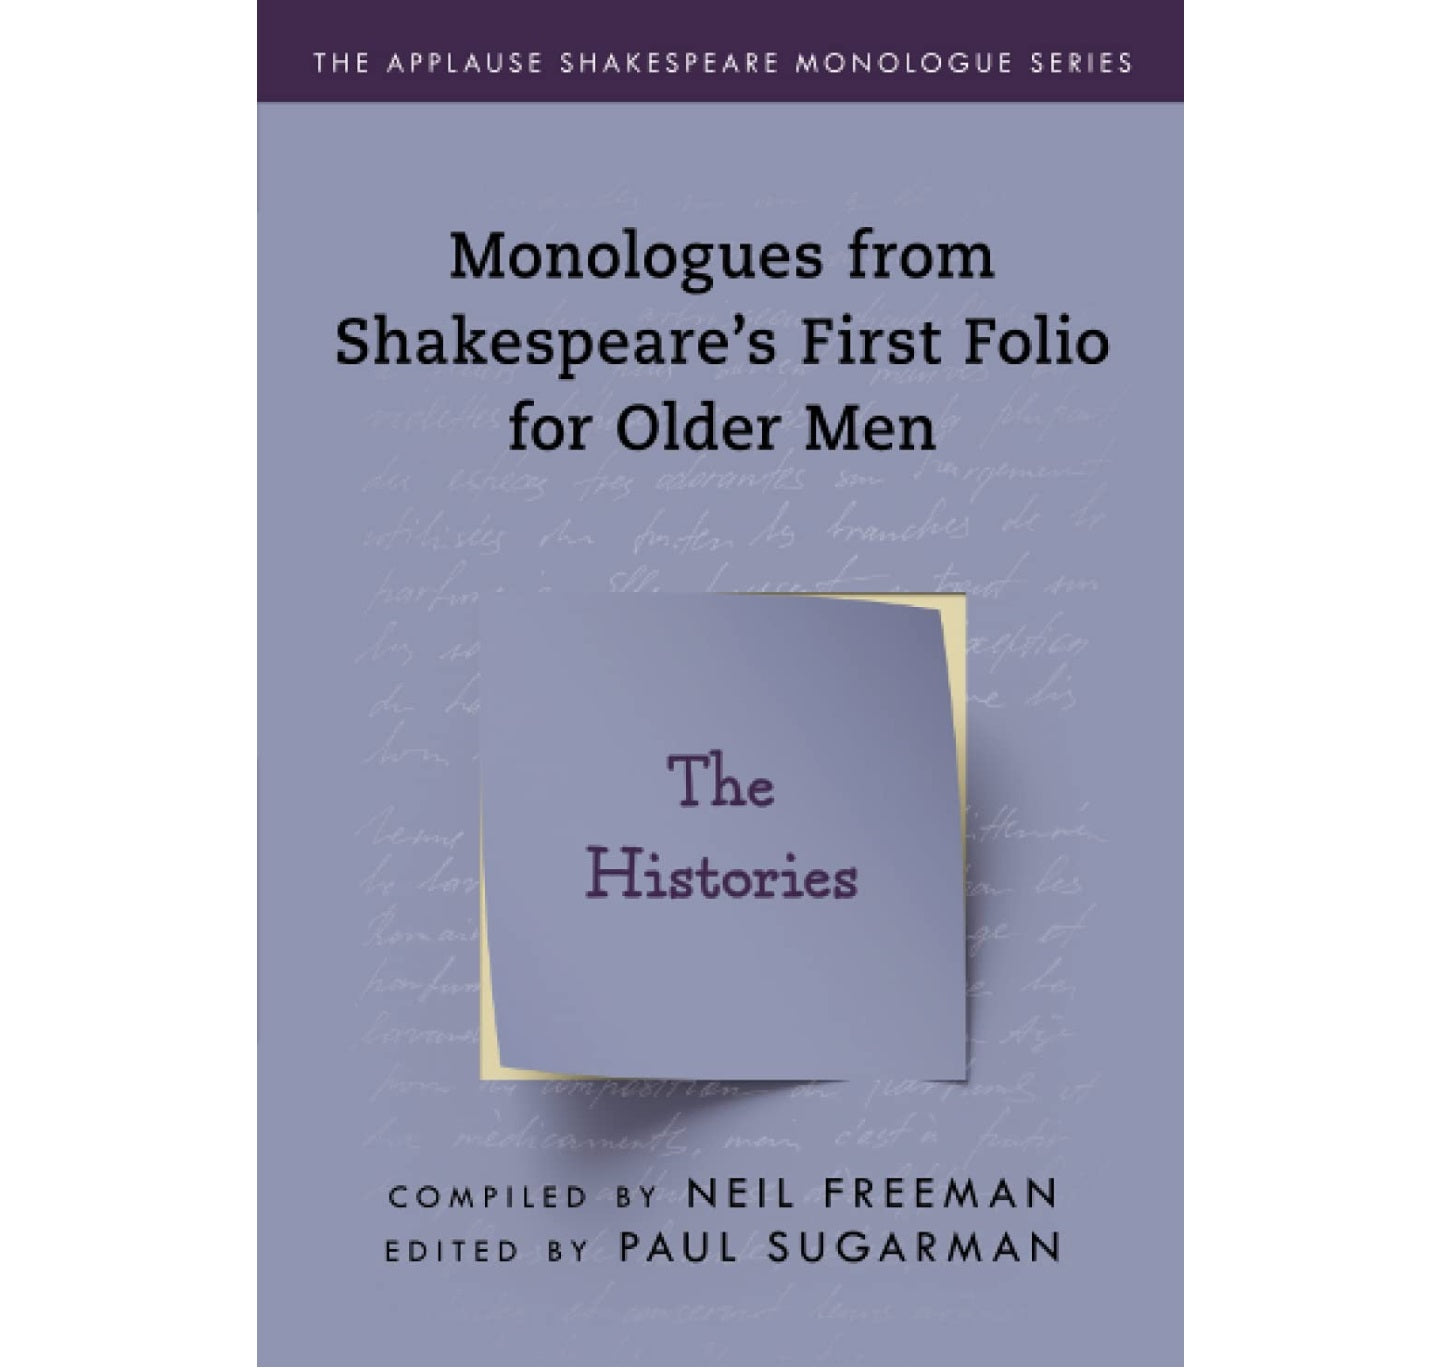 Monologues from Shakespeare’s First Folio for Older Men - The Histories PB